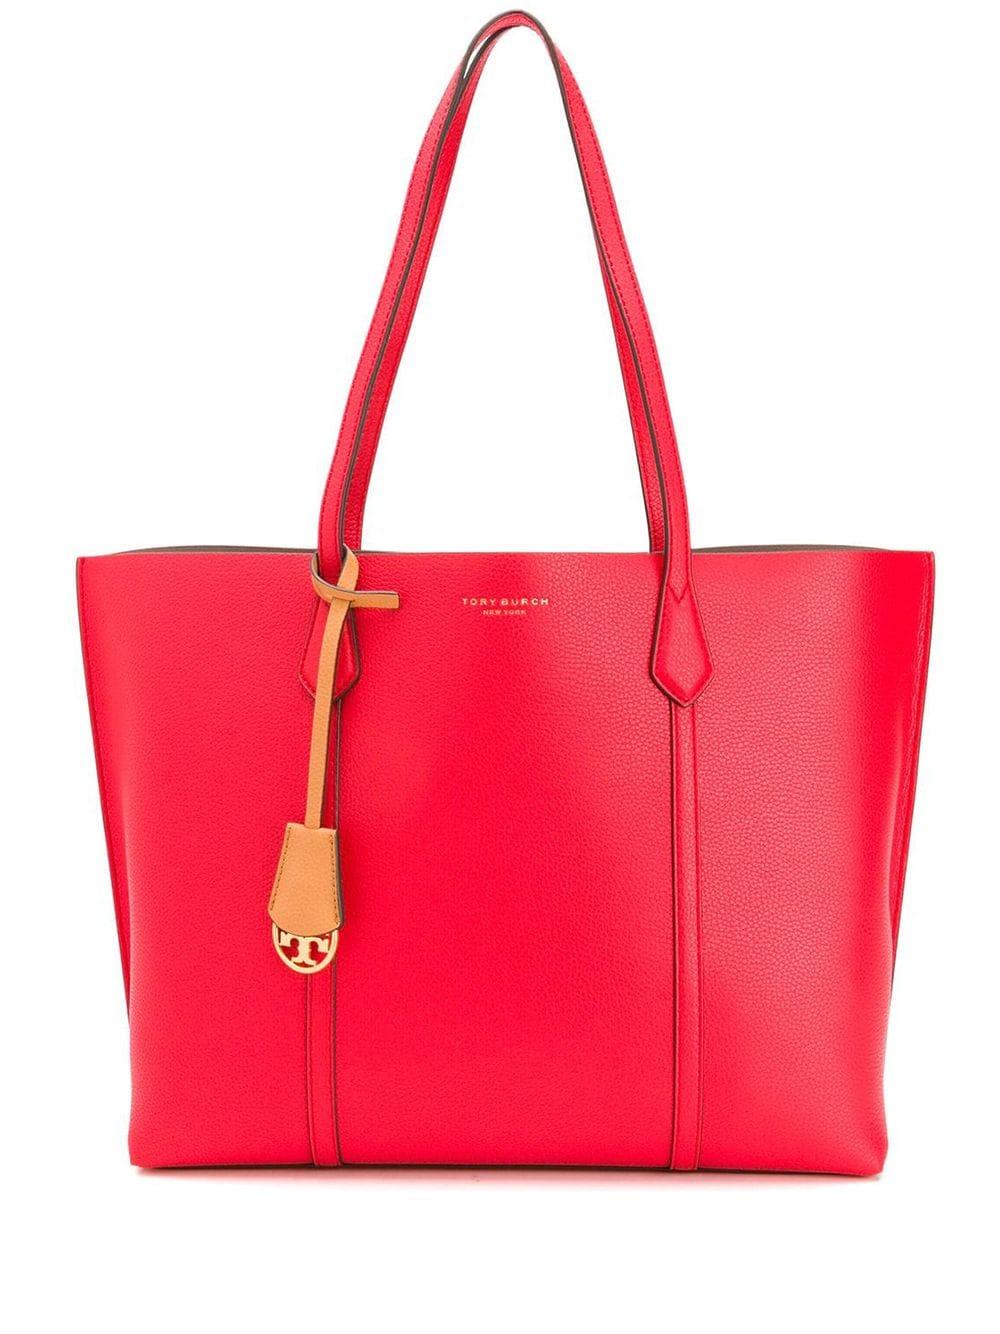 Tory Burch Leather Perry Triple-compartment Tote in Red - Lyst